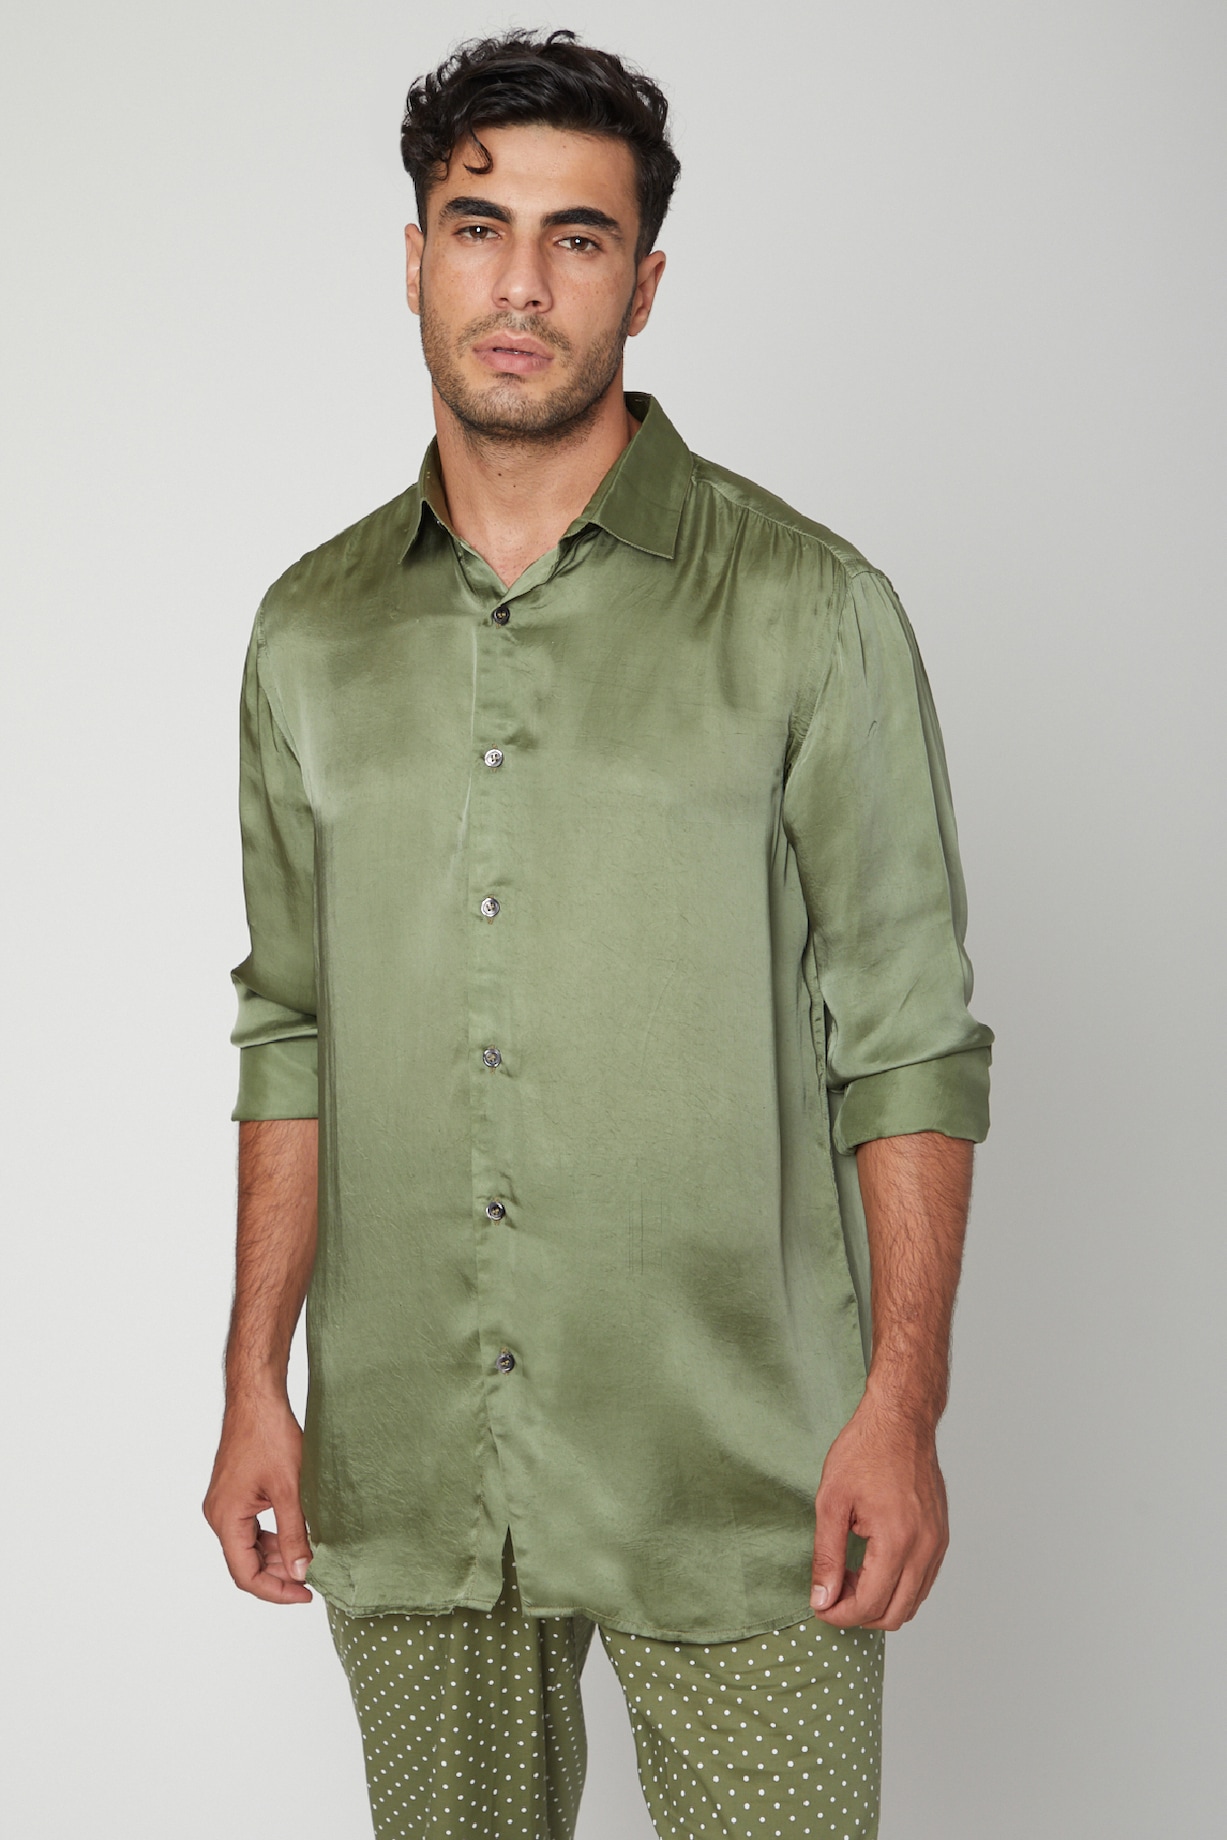 Olive Green Shirt With Pants Design by Mint Blush Men at Pernia's